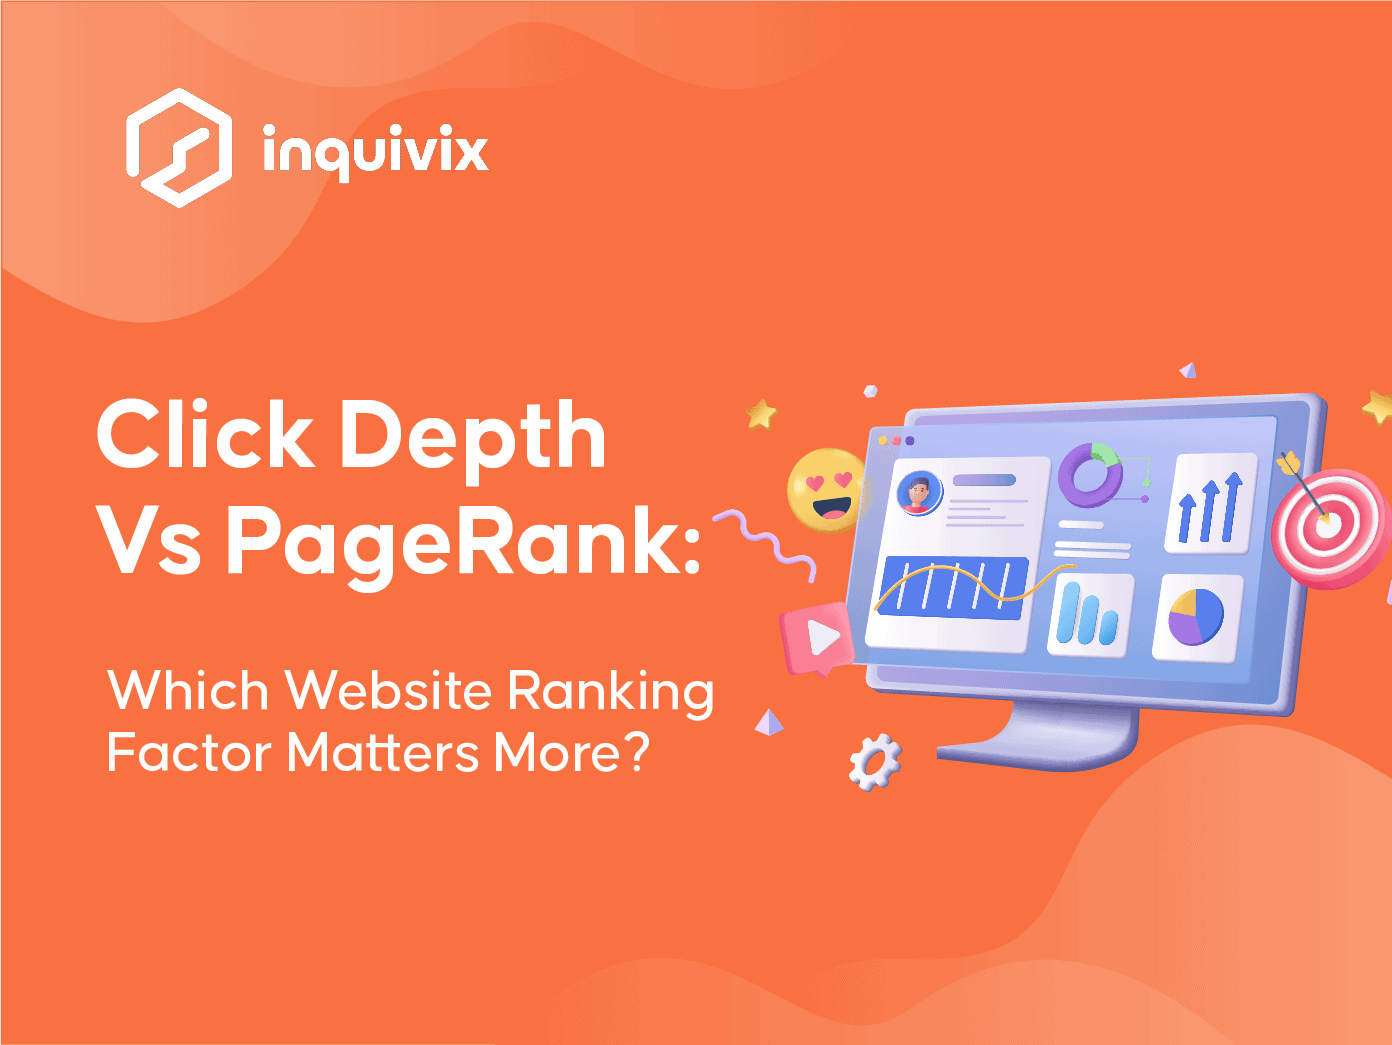 Click Depth Vs PageRank: Which Website Ranking Factor Matters More?